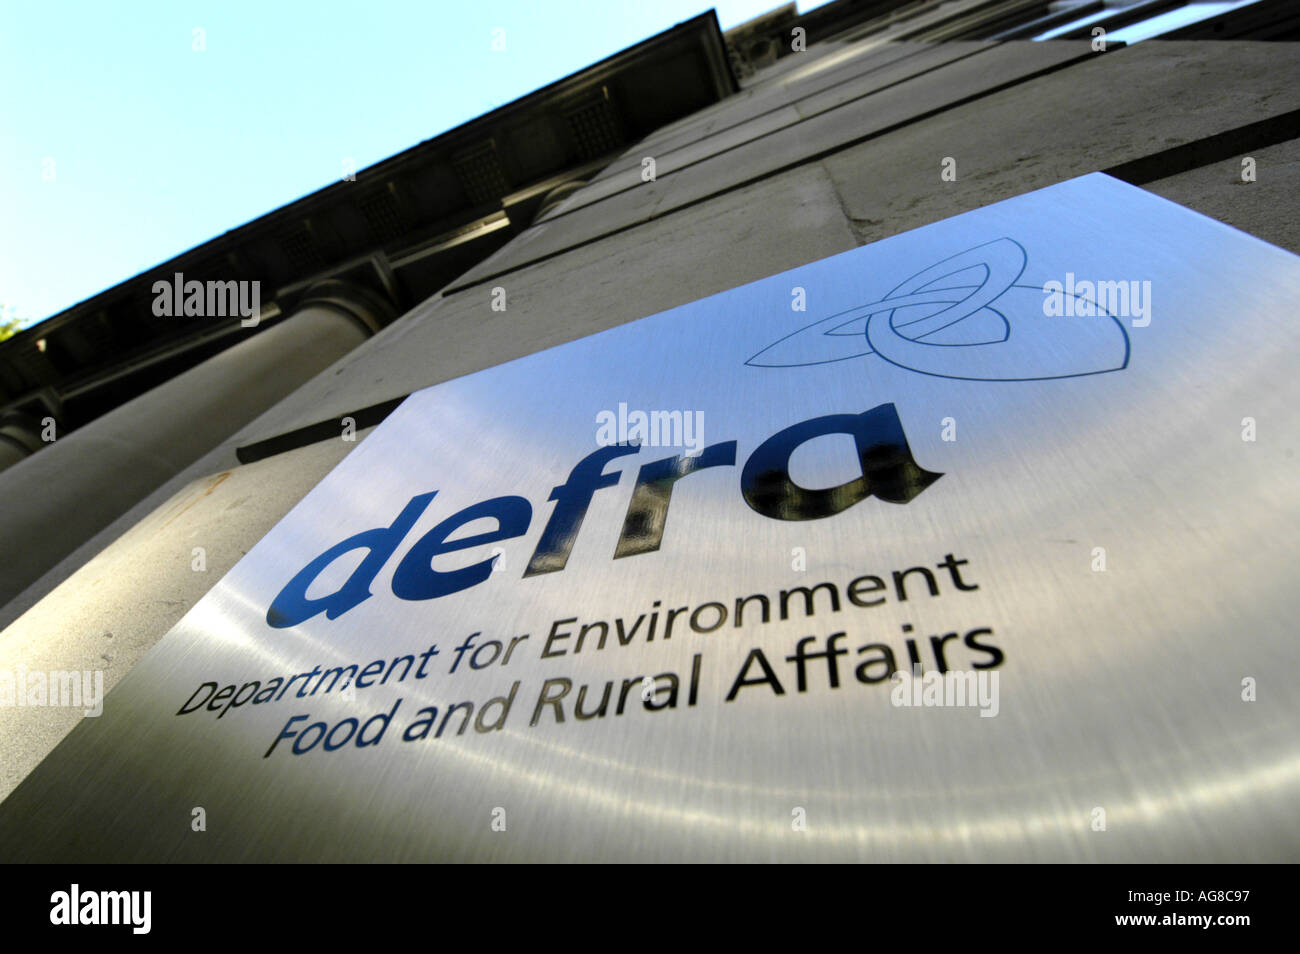 DEFRA Department for Environment Food and Rural Affairs, London, England, UK Stock Photo